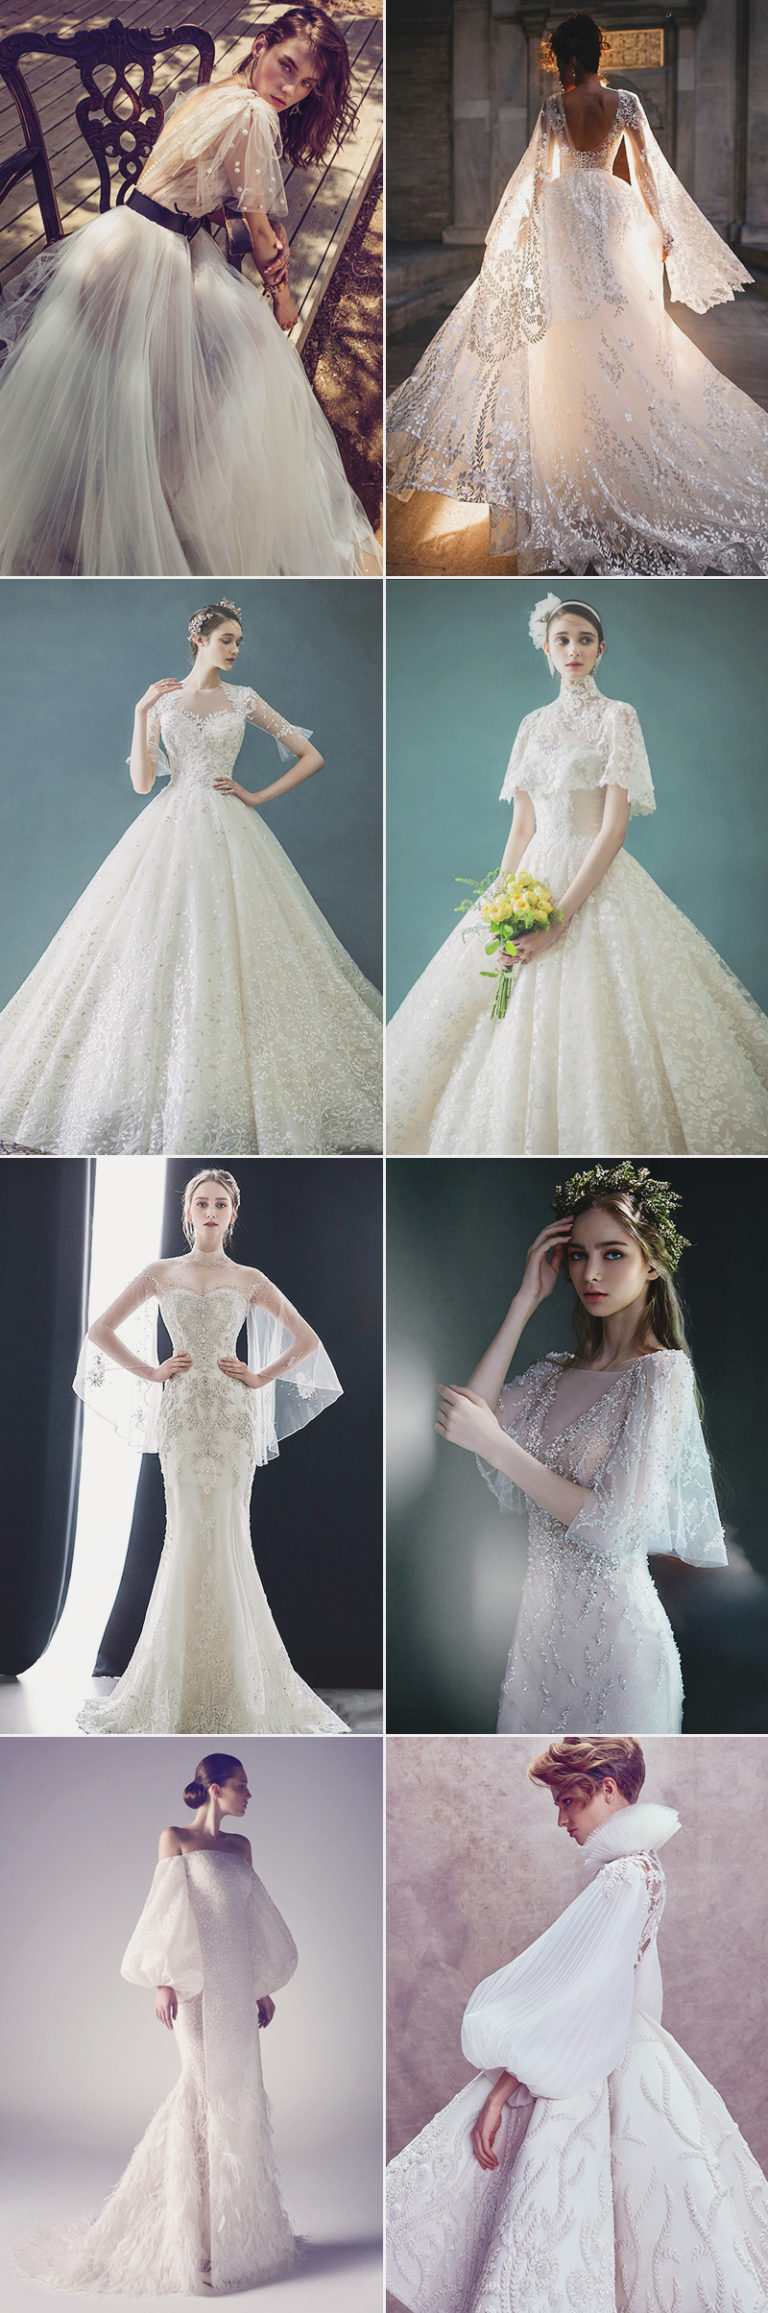 34 Beautiful Wedding Dresses with Sleeves For Winter Brides! - Praise ...